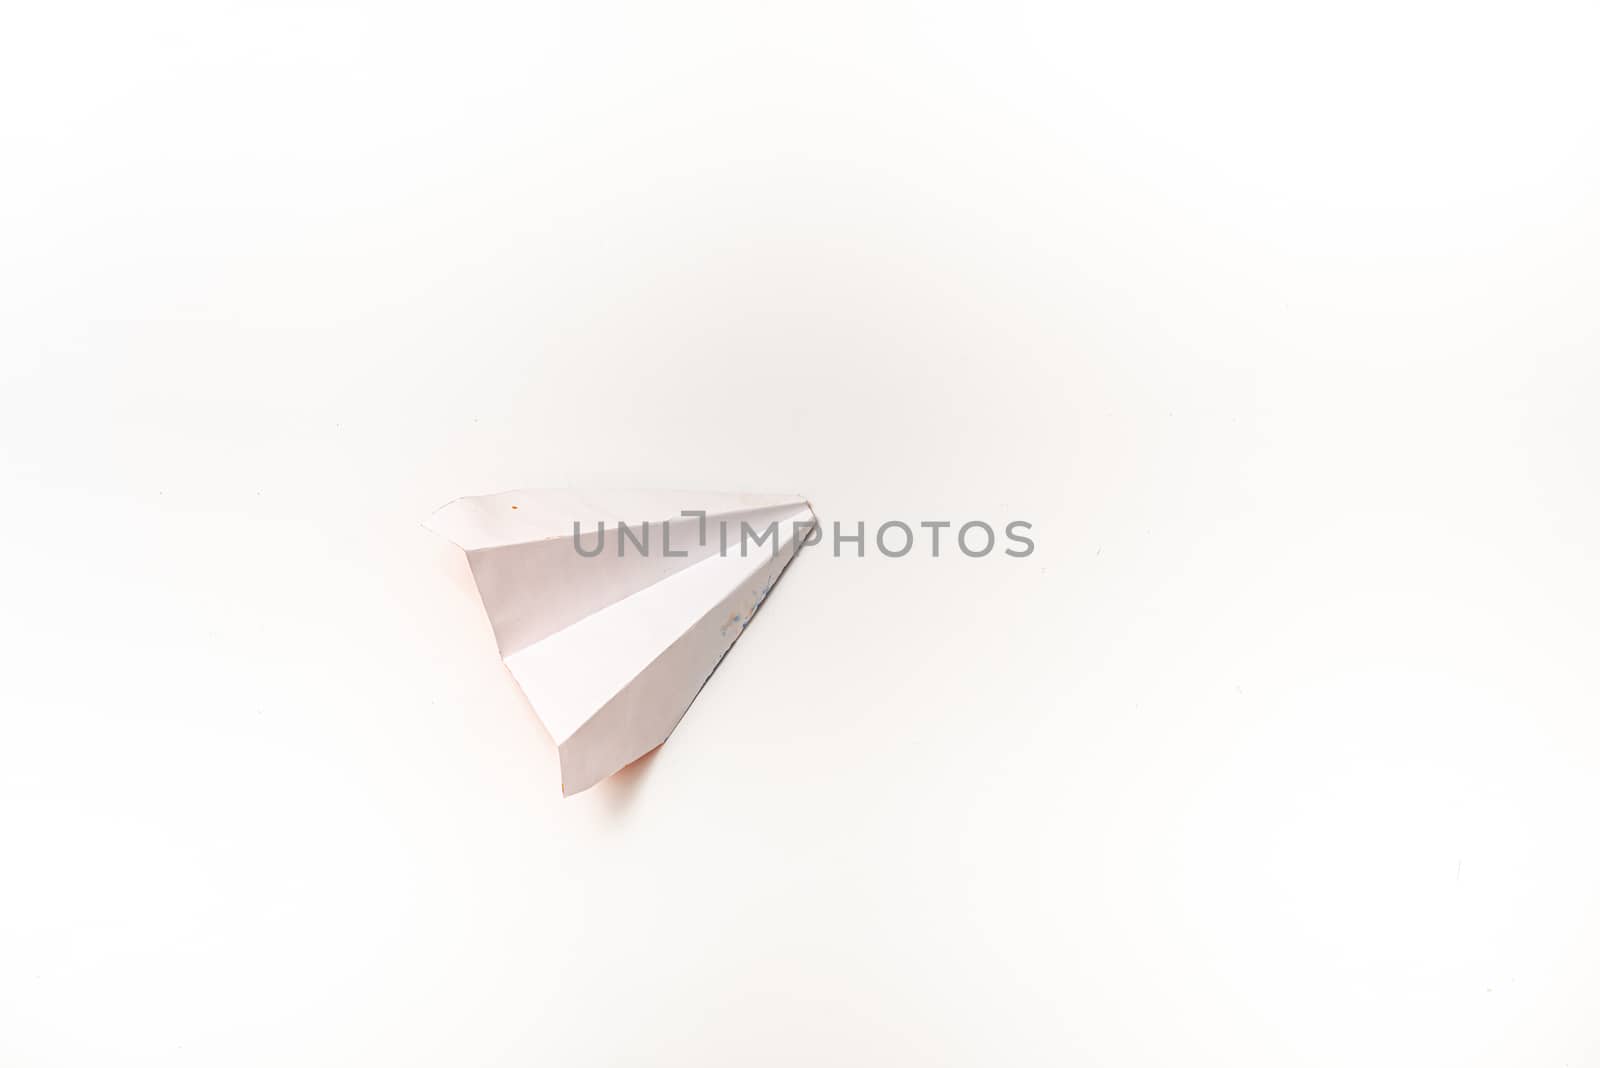 paper plane on a white background